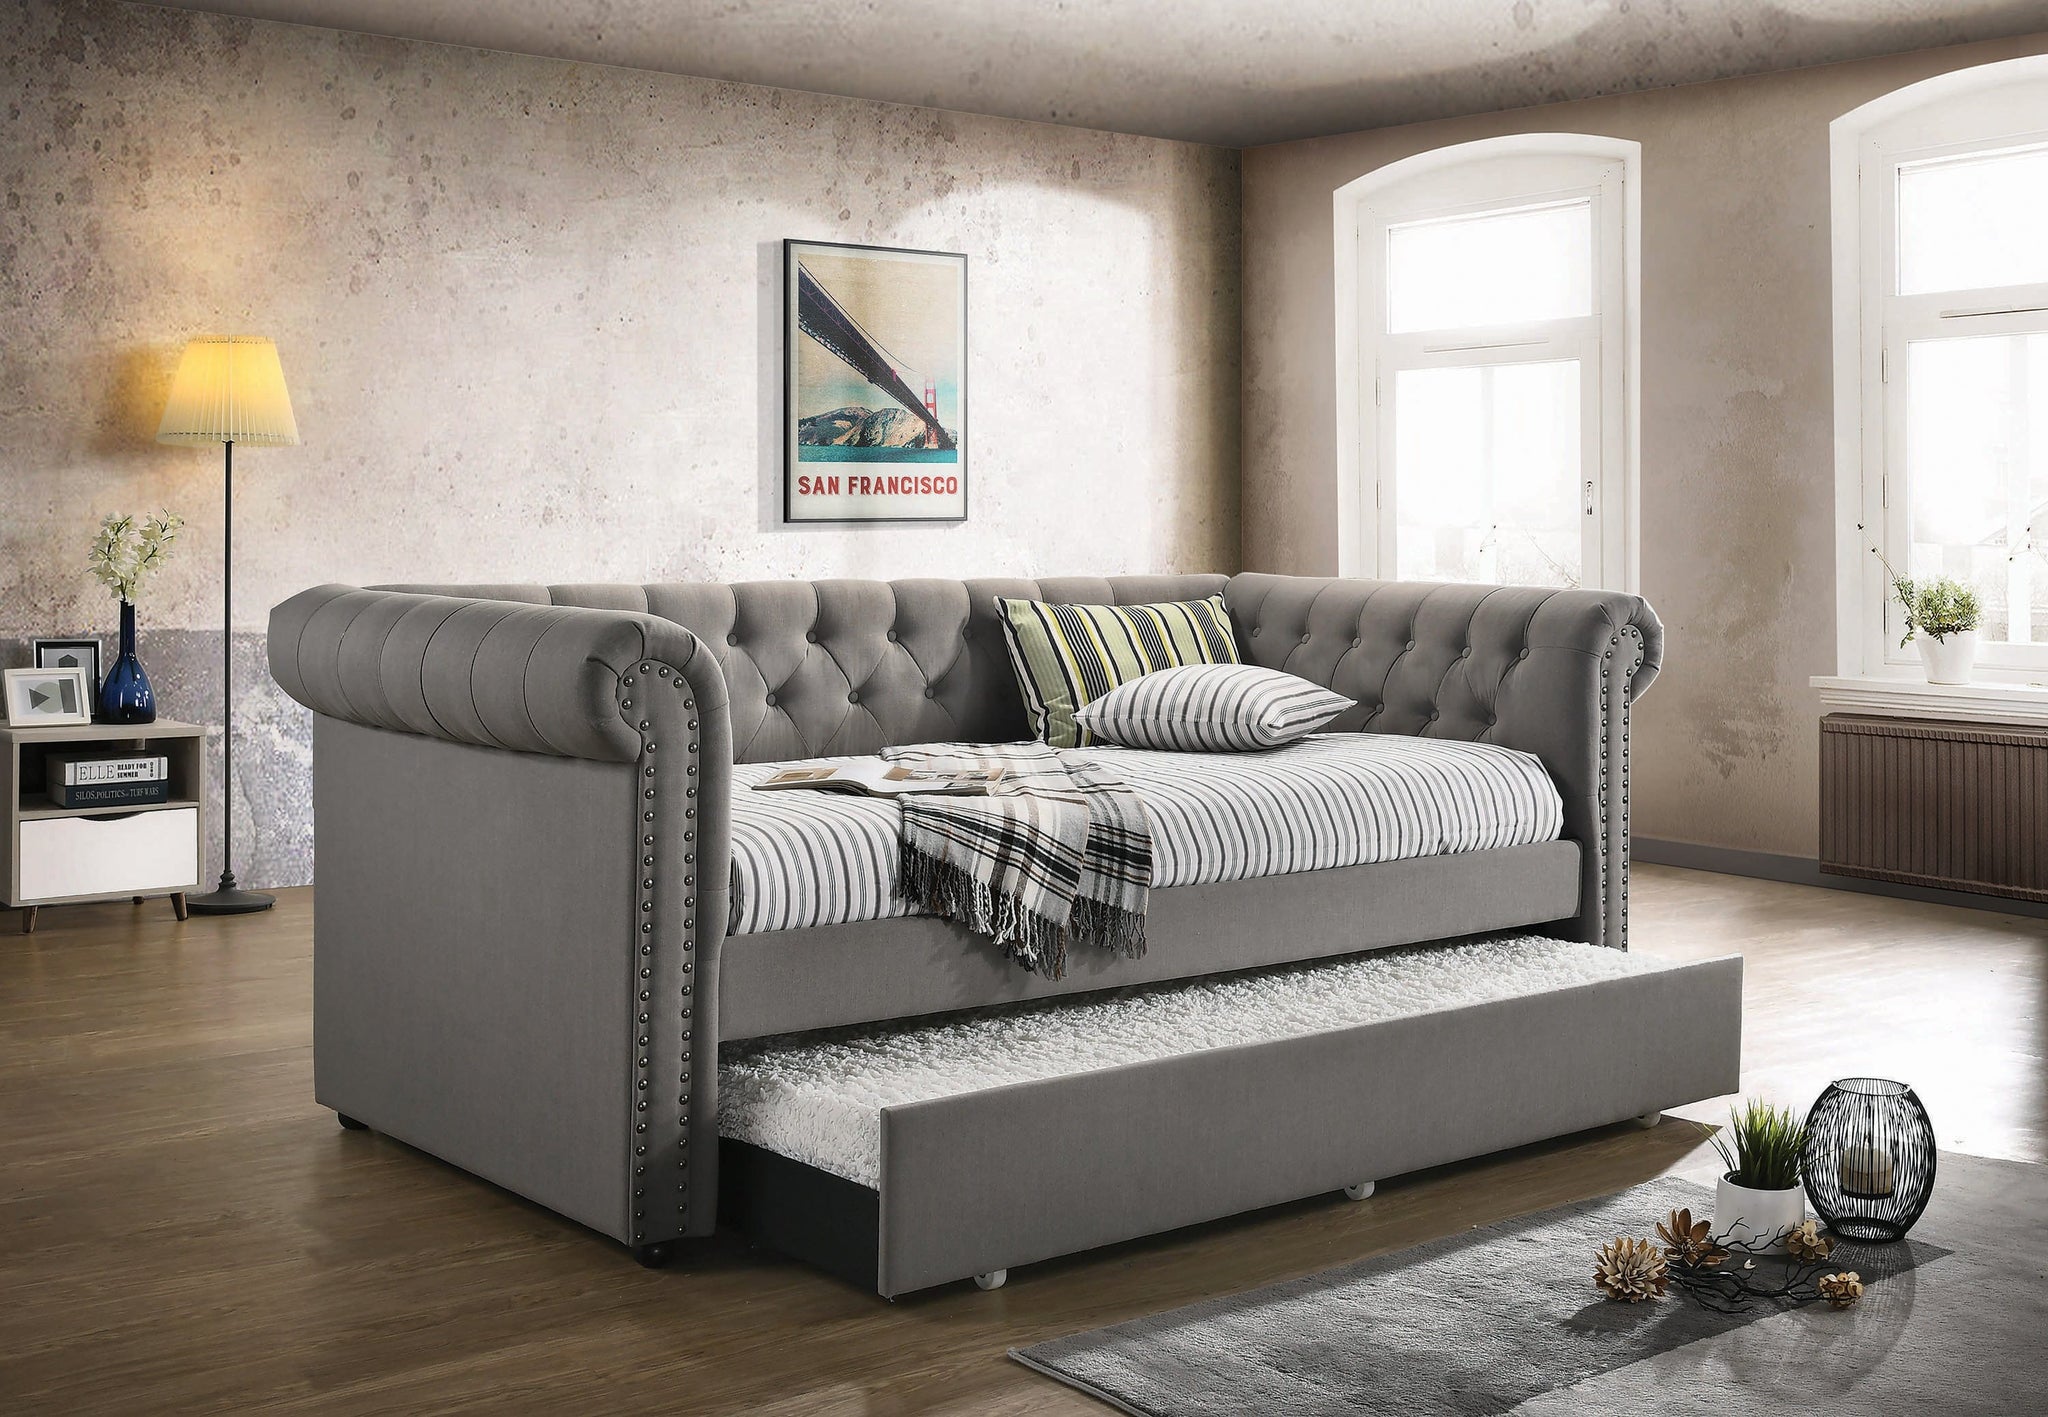 Kepner Tufted Upholstered Daybed Grey With Trundle - 300549